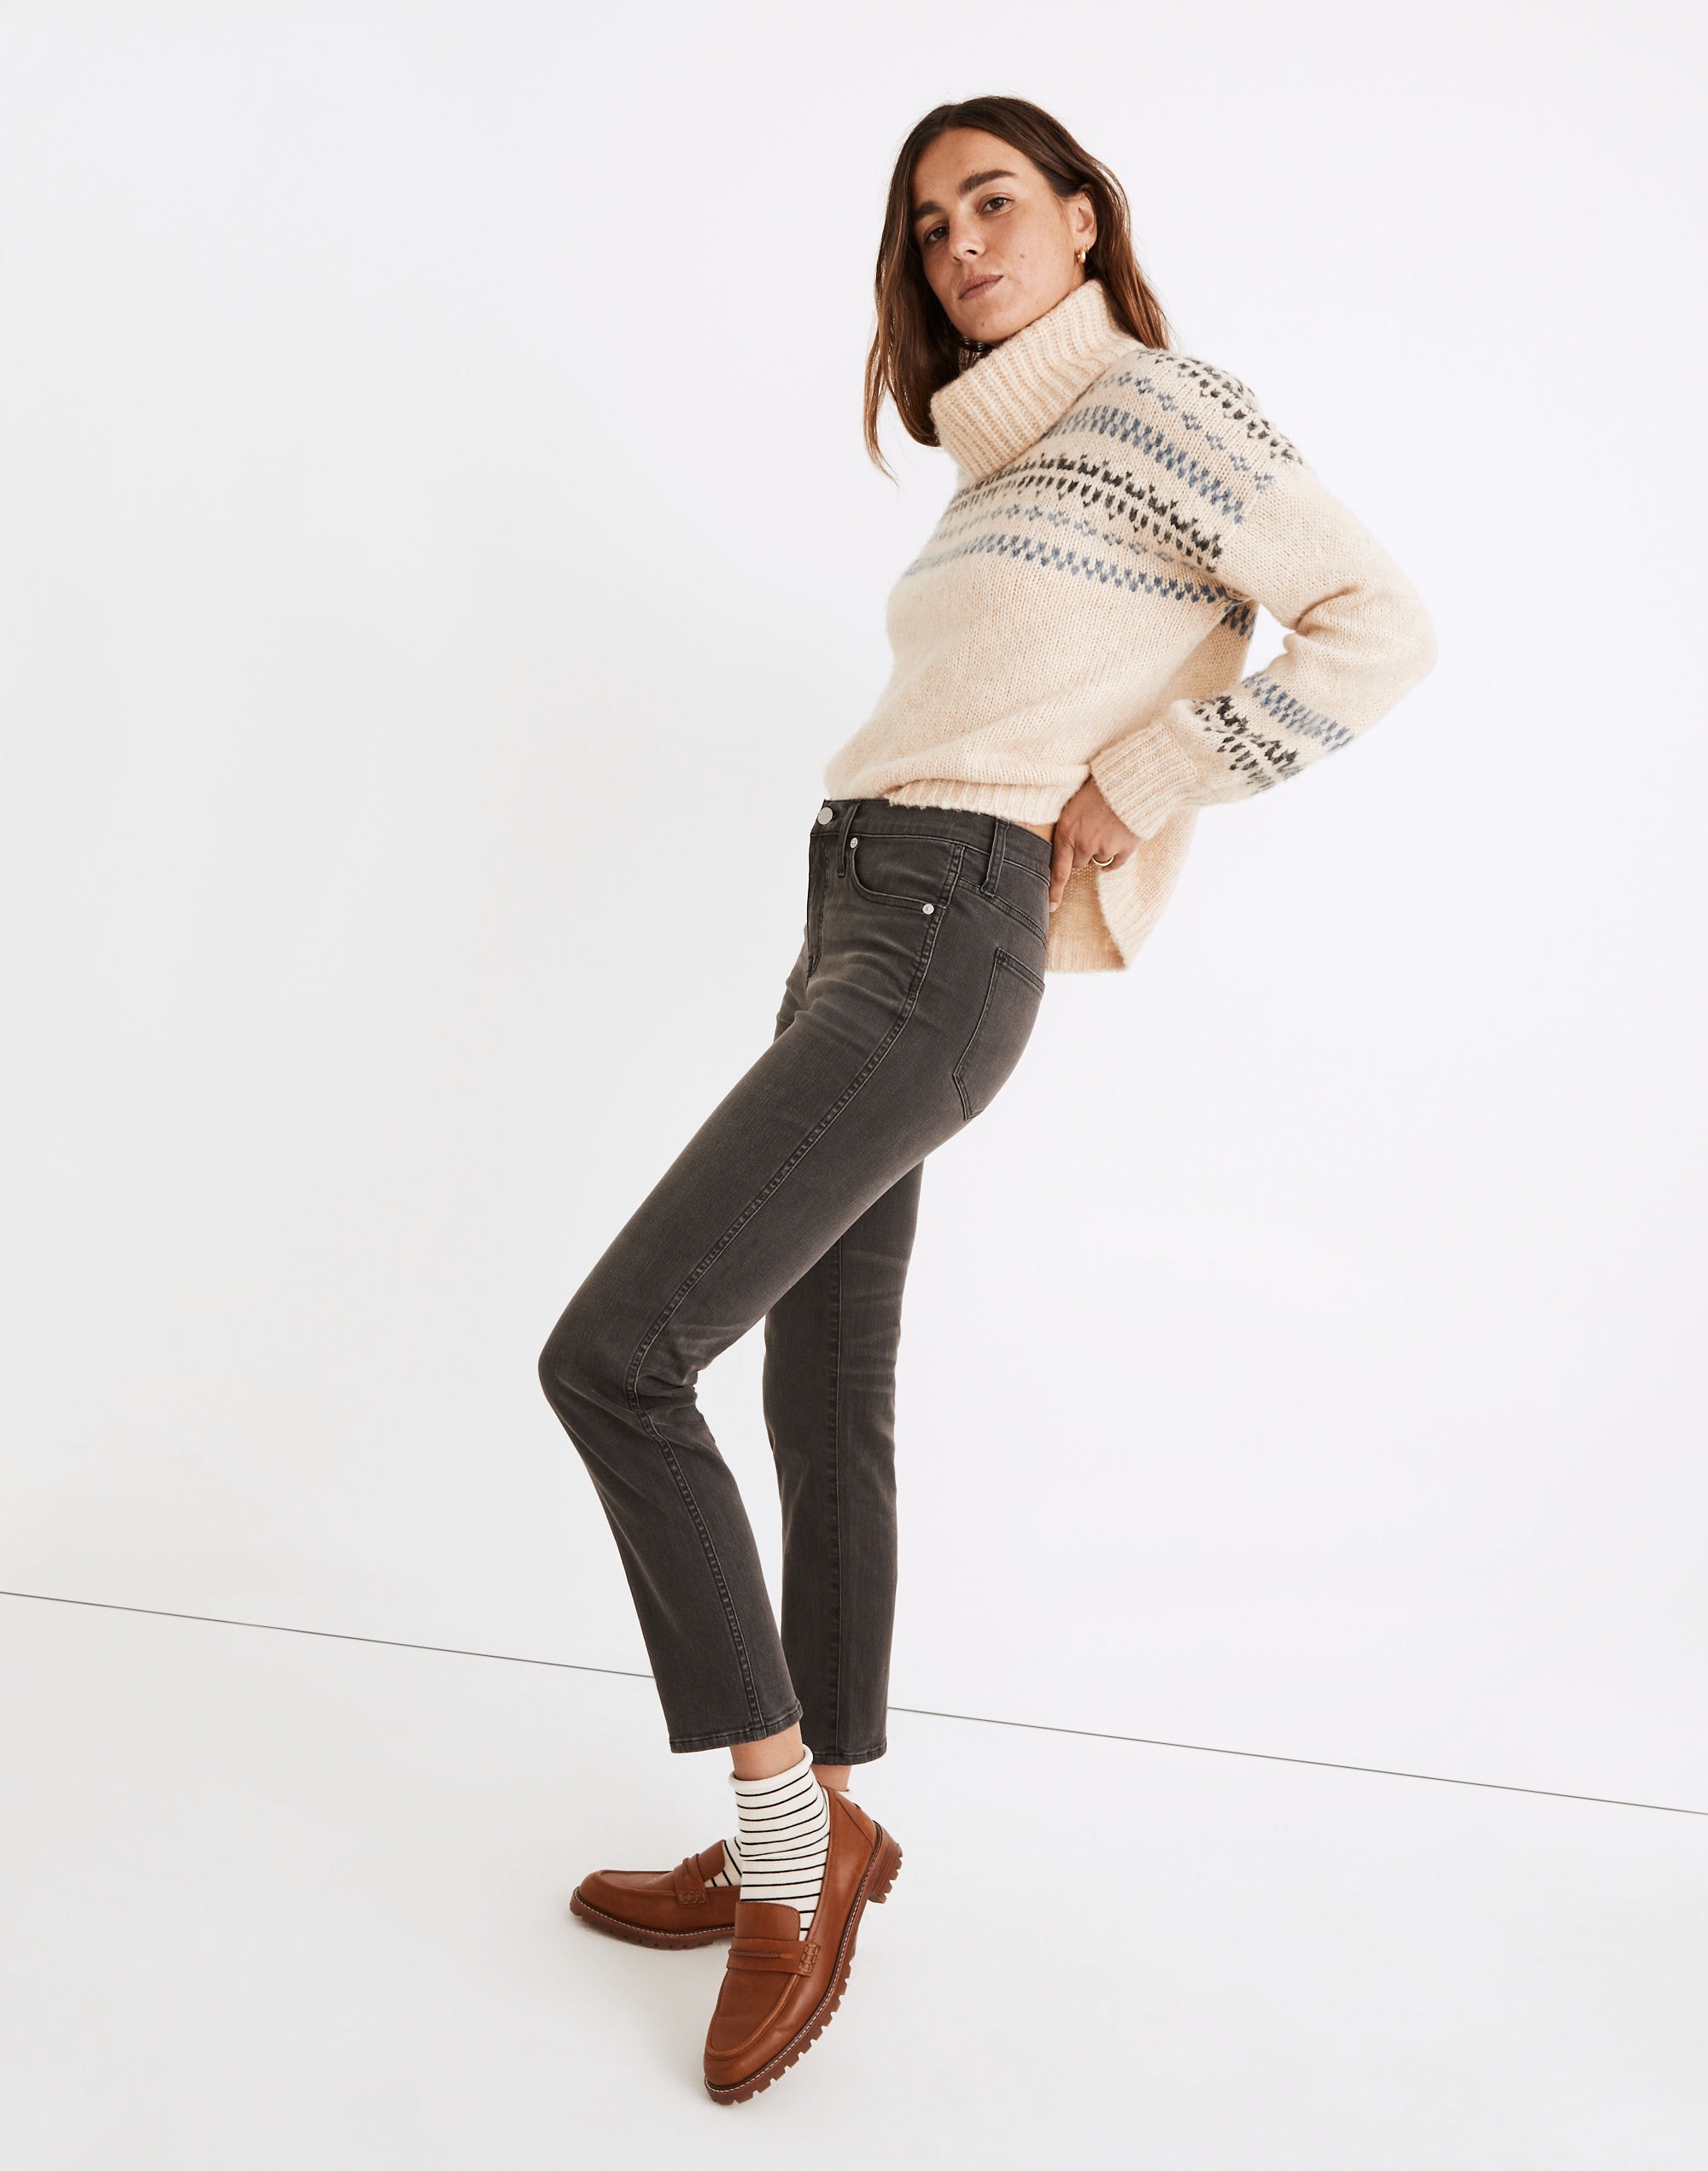 Tall Mid-Rise Stovepipe Jeans in Bridley Wash